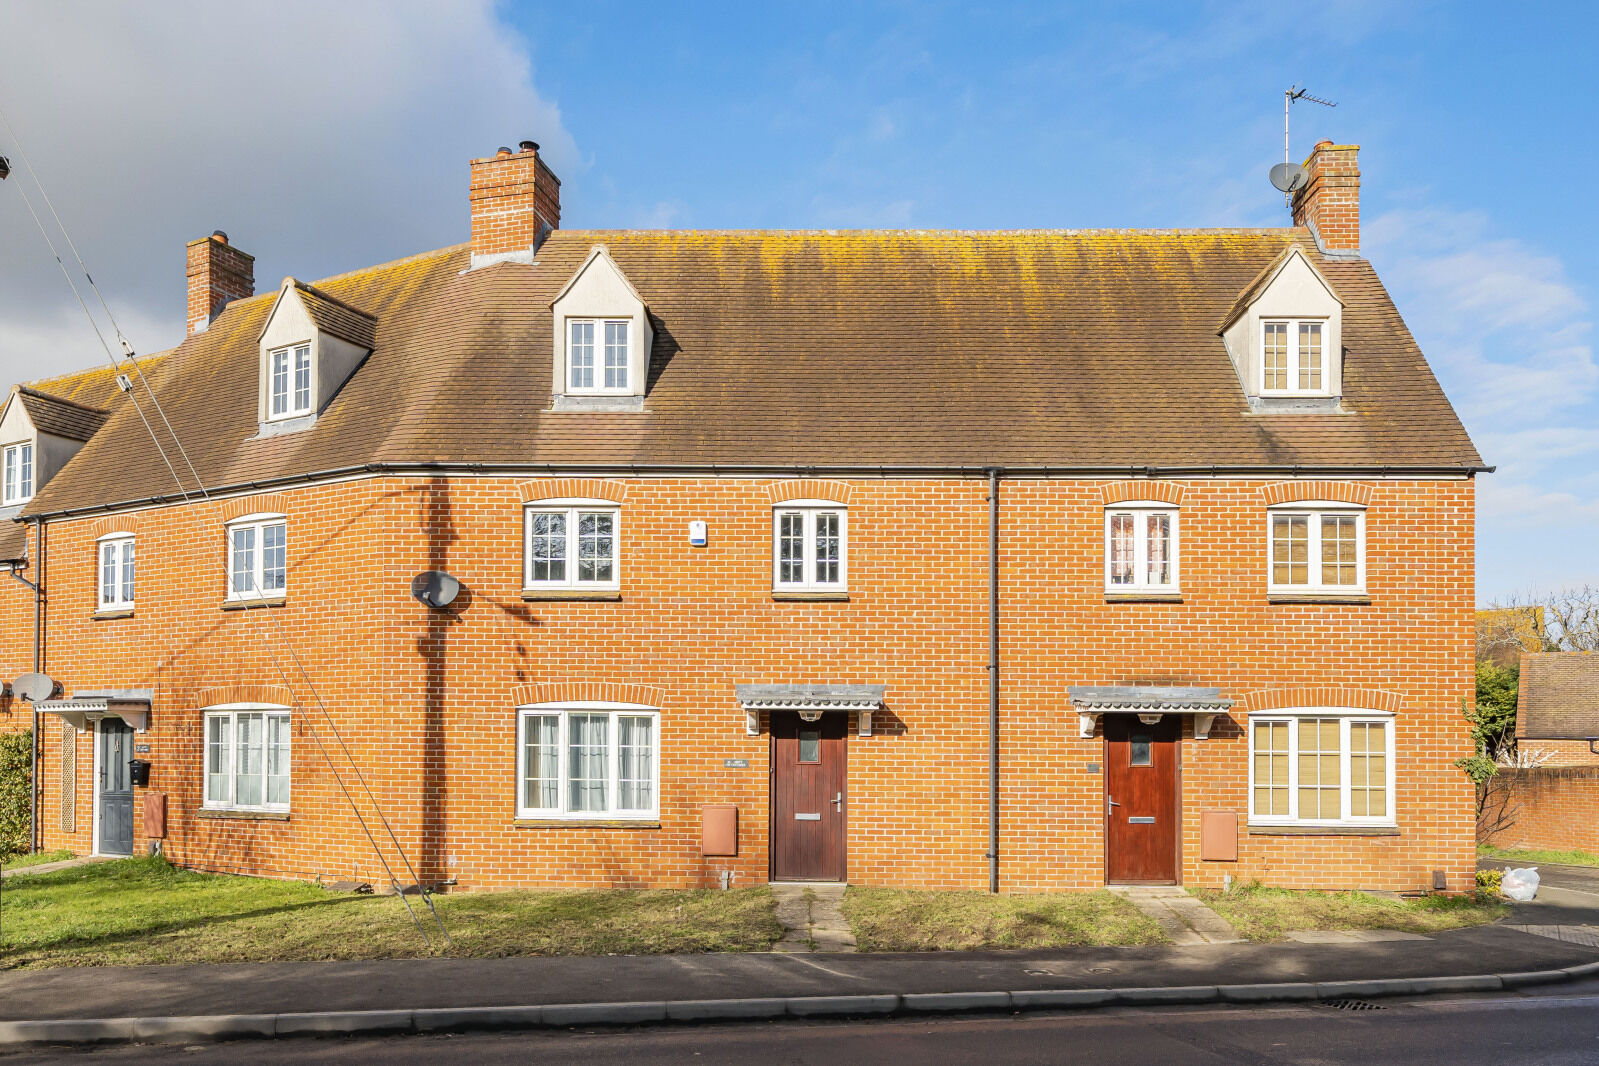 3 bedroom mid terraced house for sale The Green, Drayton, OX14, main image